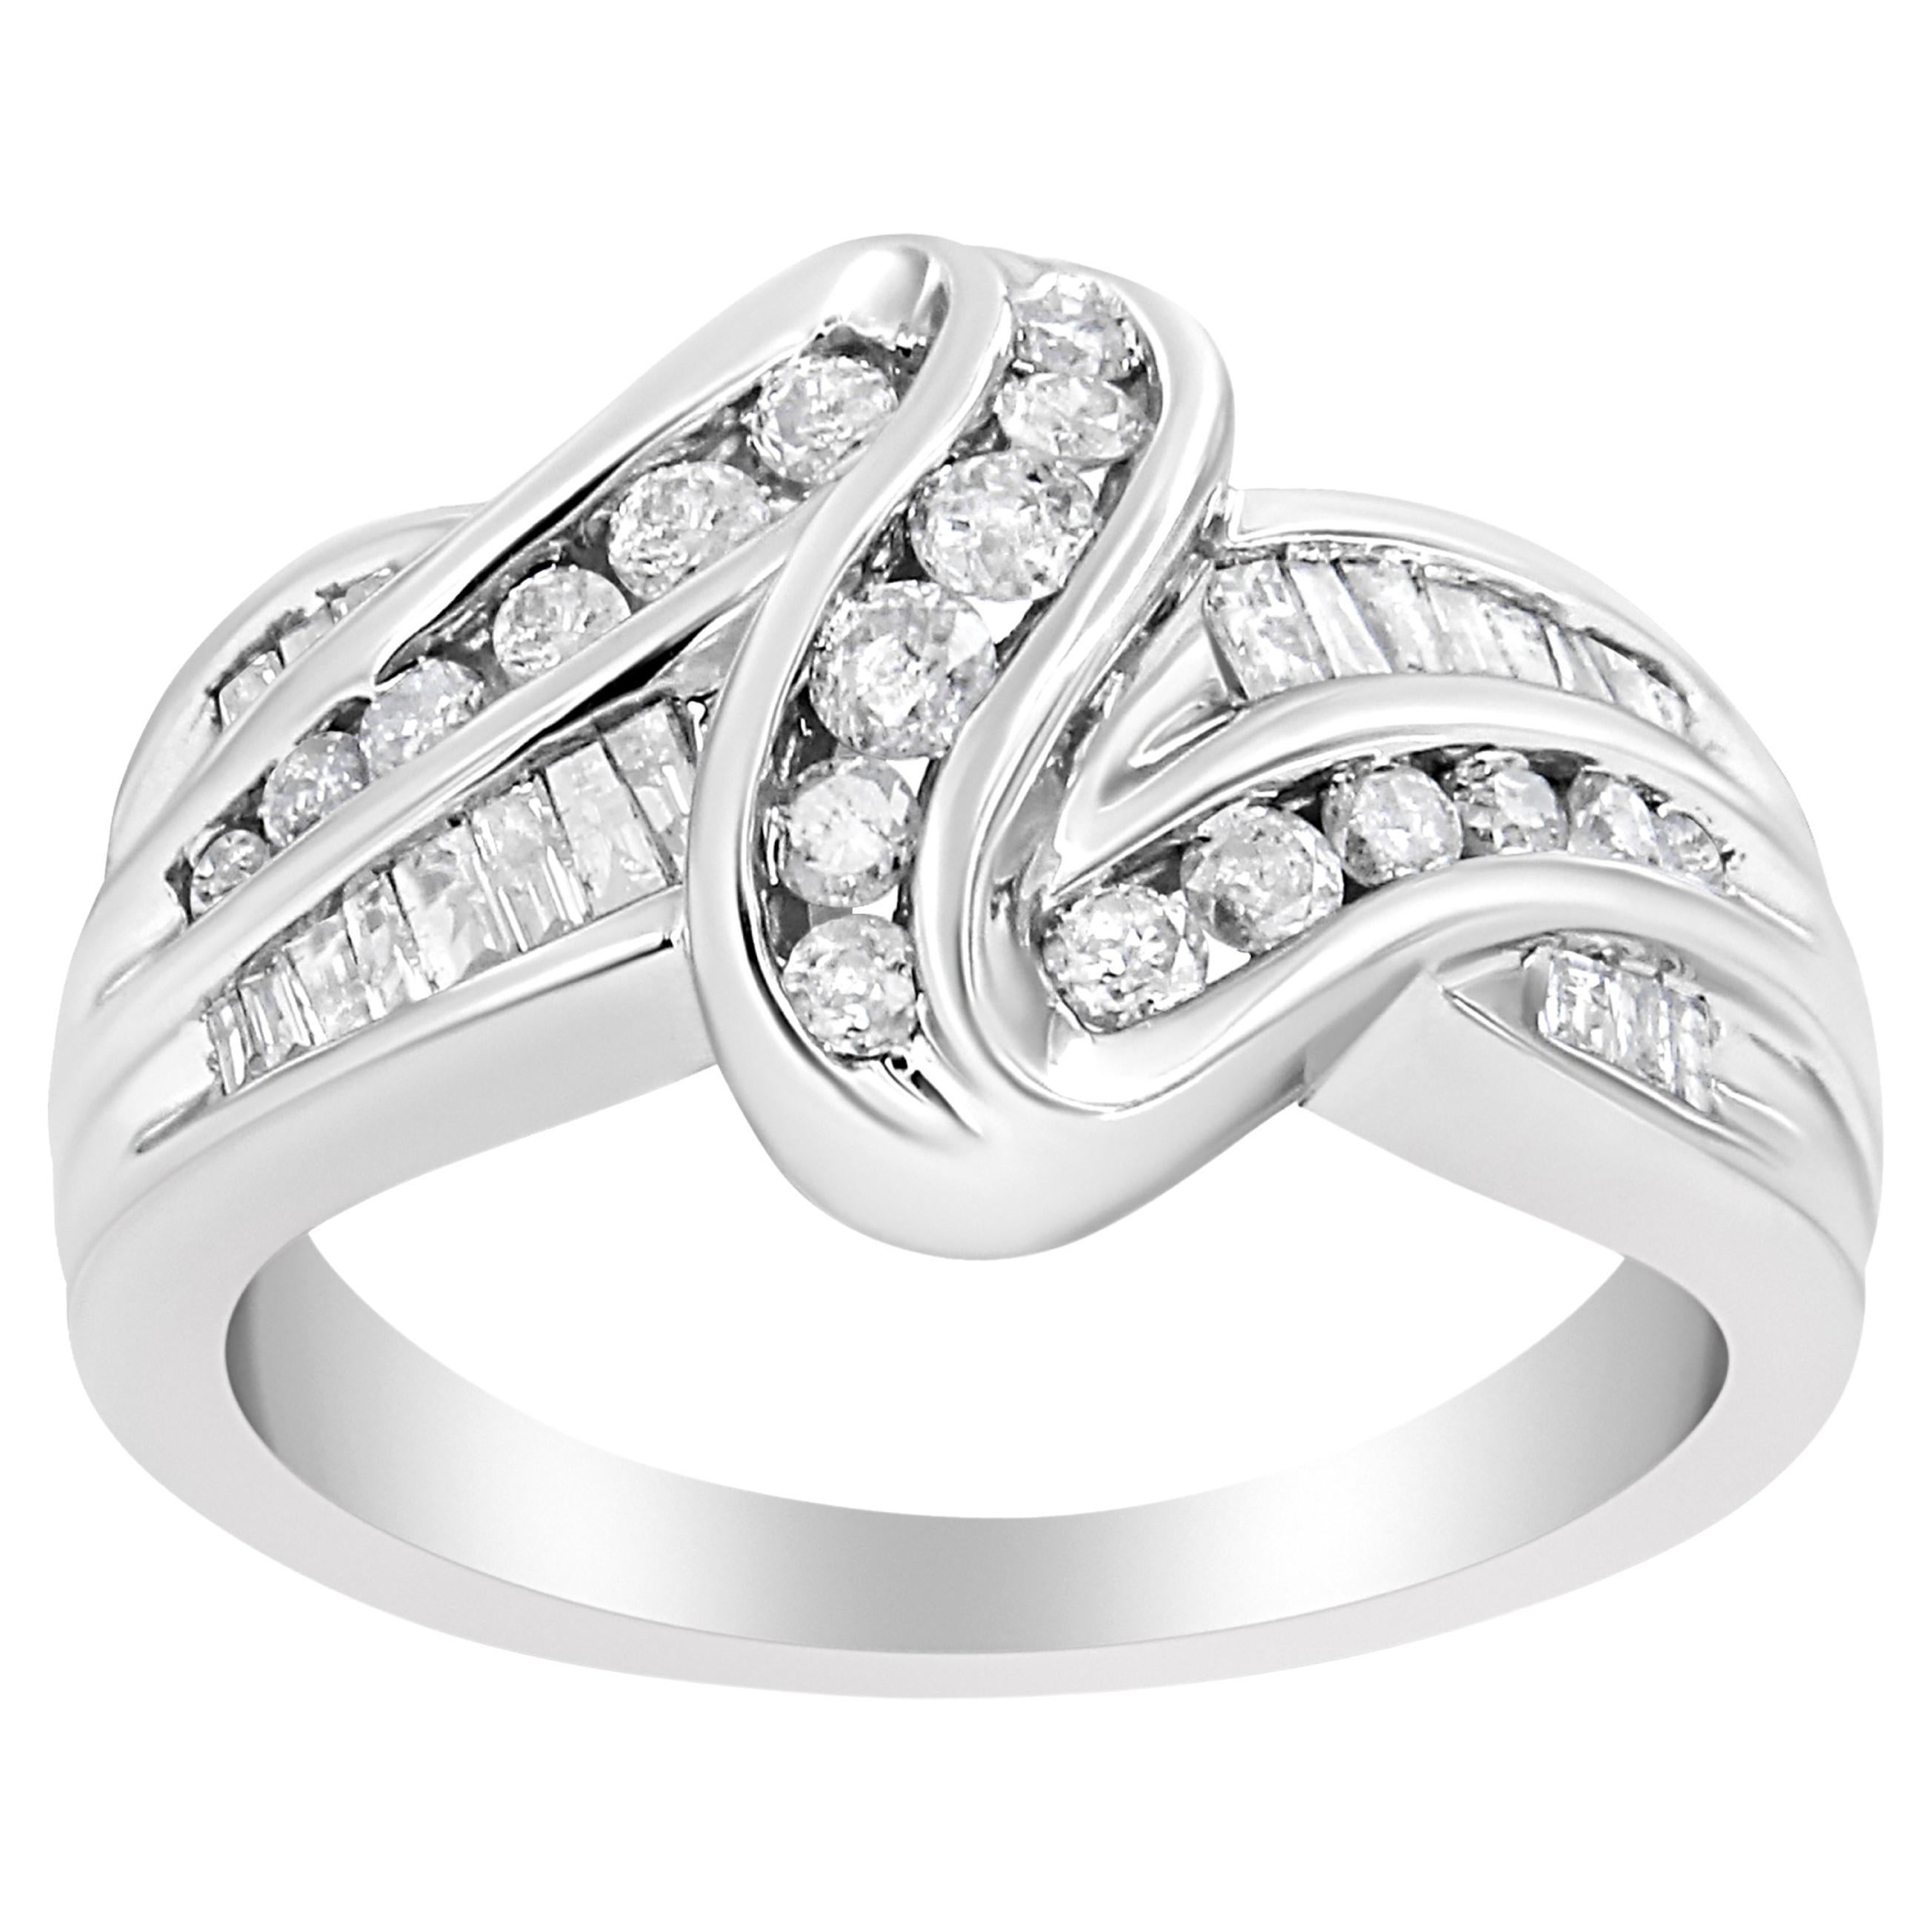 10K White Gold Ring 3/4 Carat Round and Baguette-Cut Diamond Bypass Ring